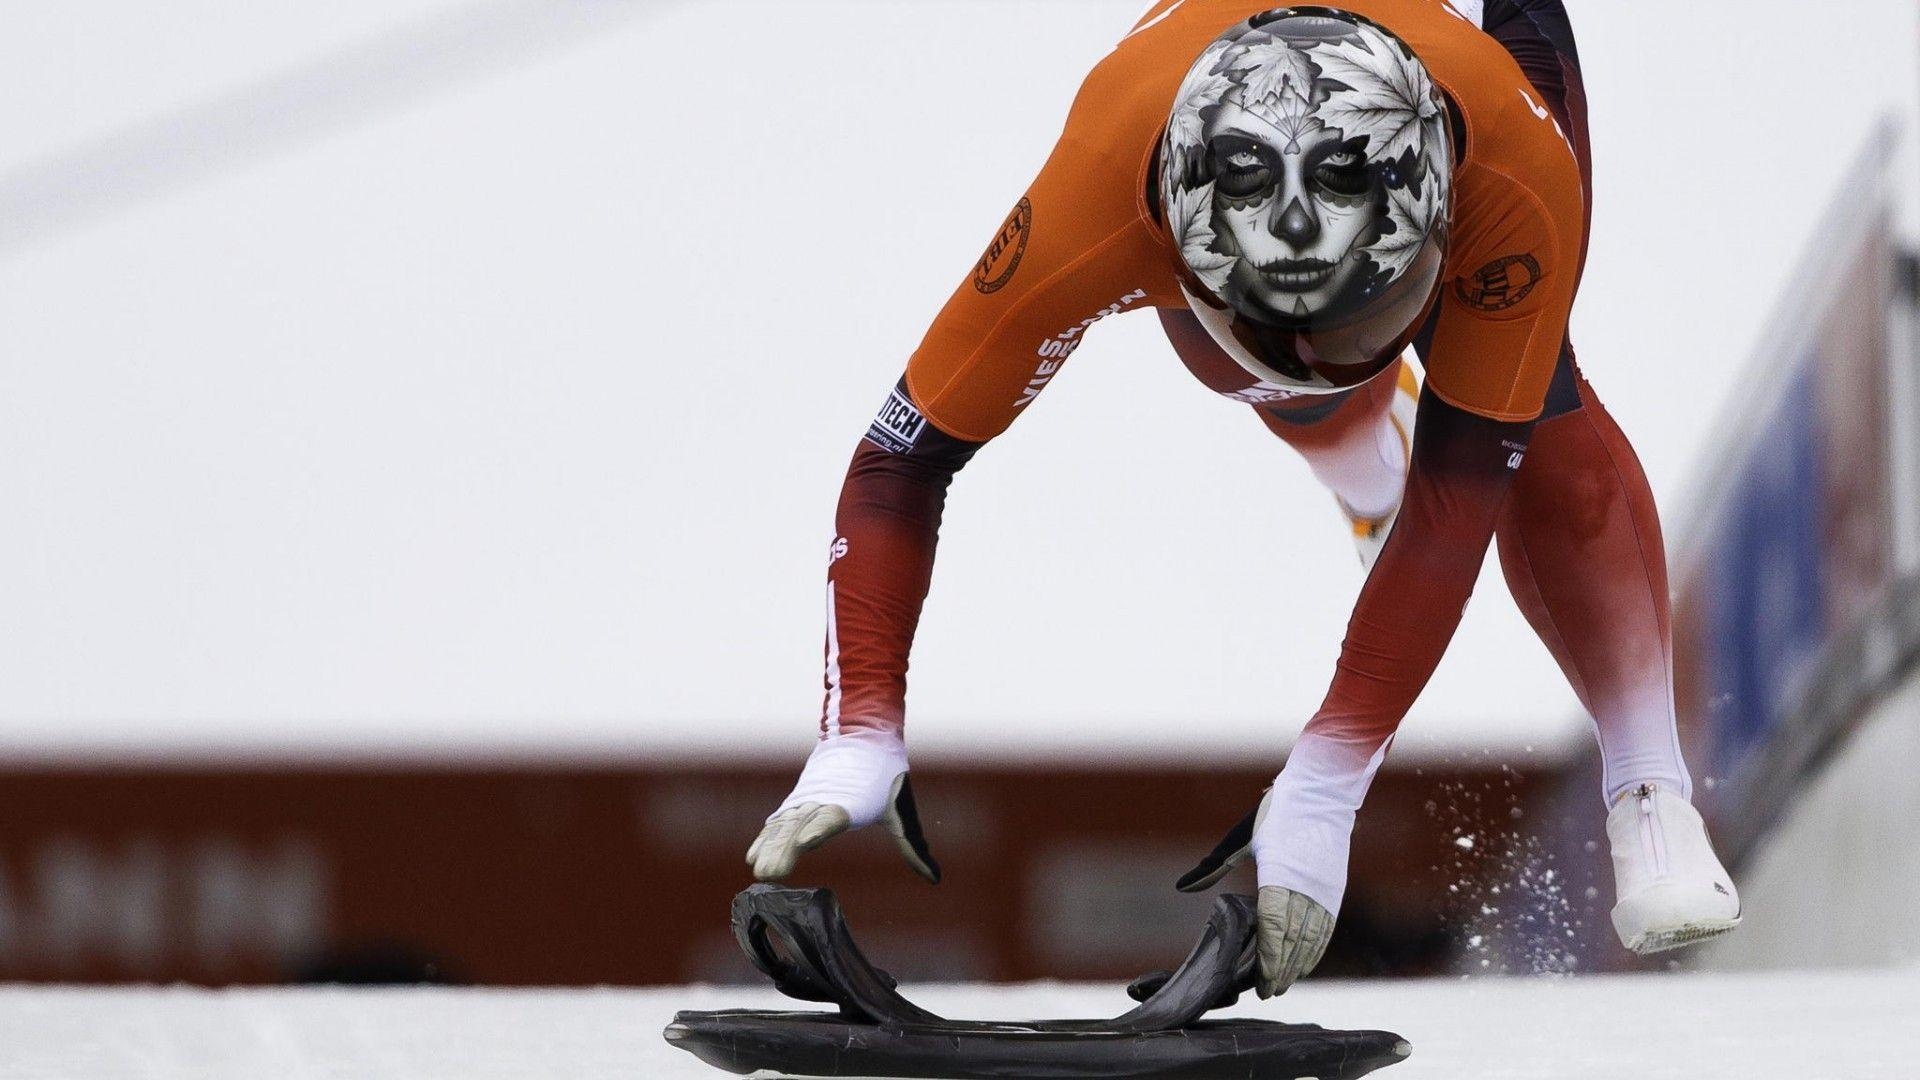 Skeleton (Sport): A winter sliding activity in which a person rides a small sled down a frozen track. 1920x1080 Full HD Background.